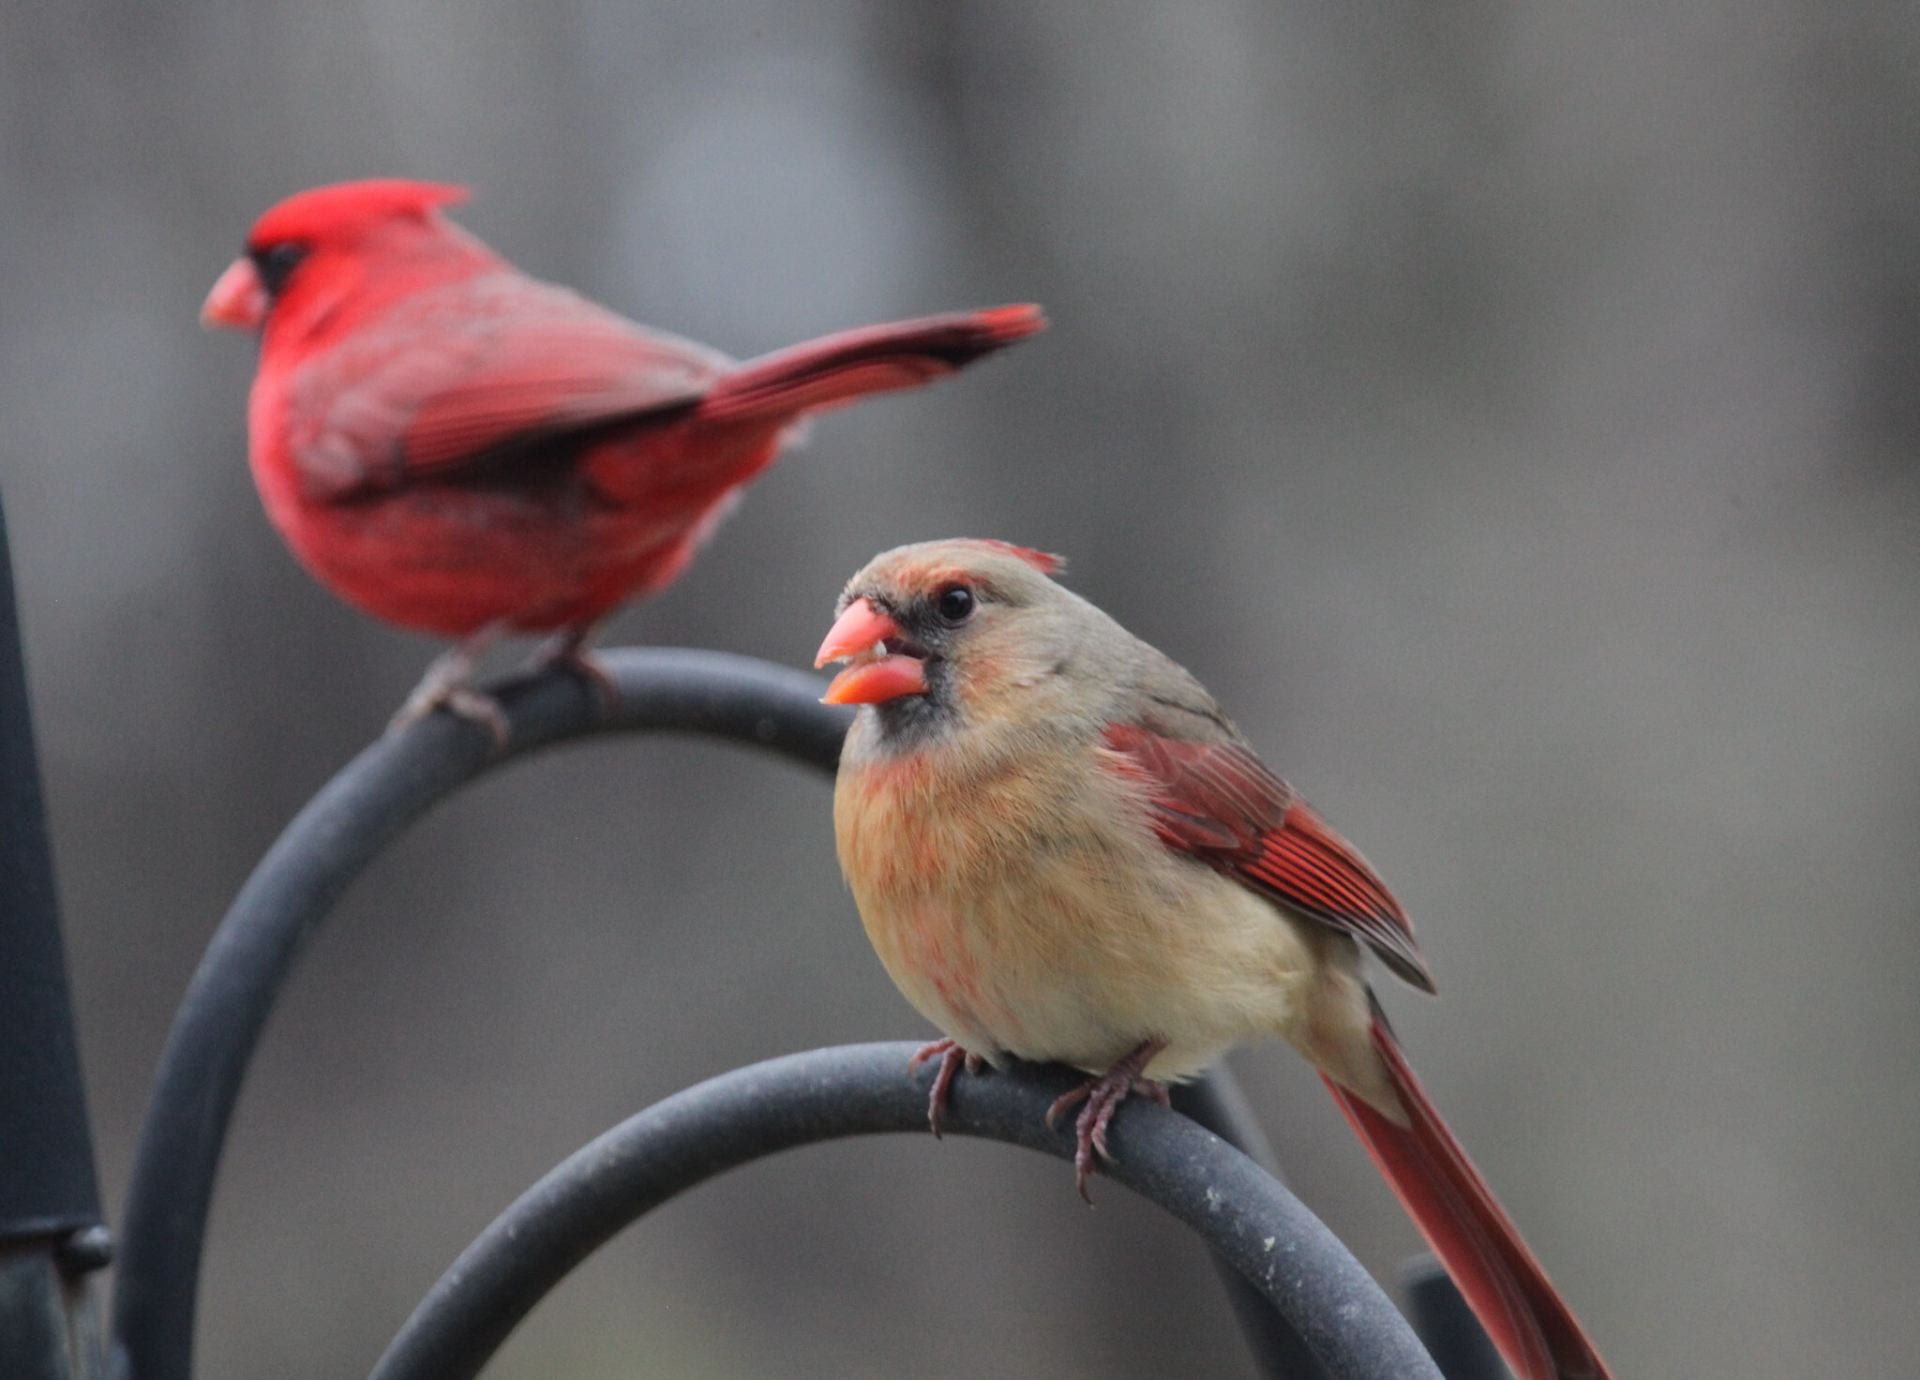 [Two round cardinals grip onto two iron bars.]